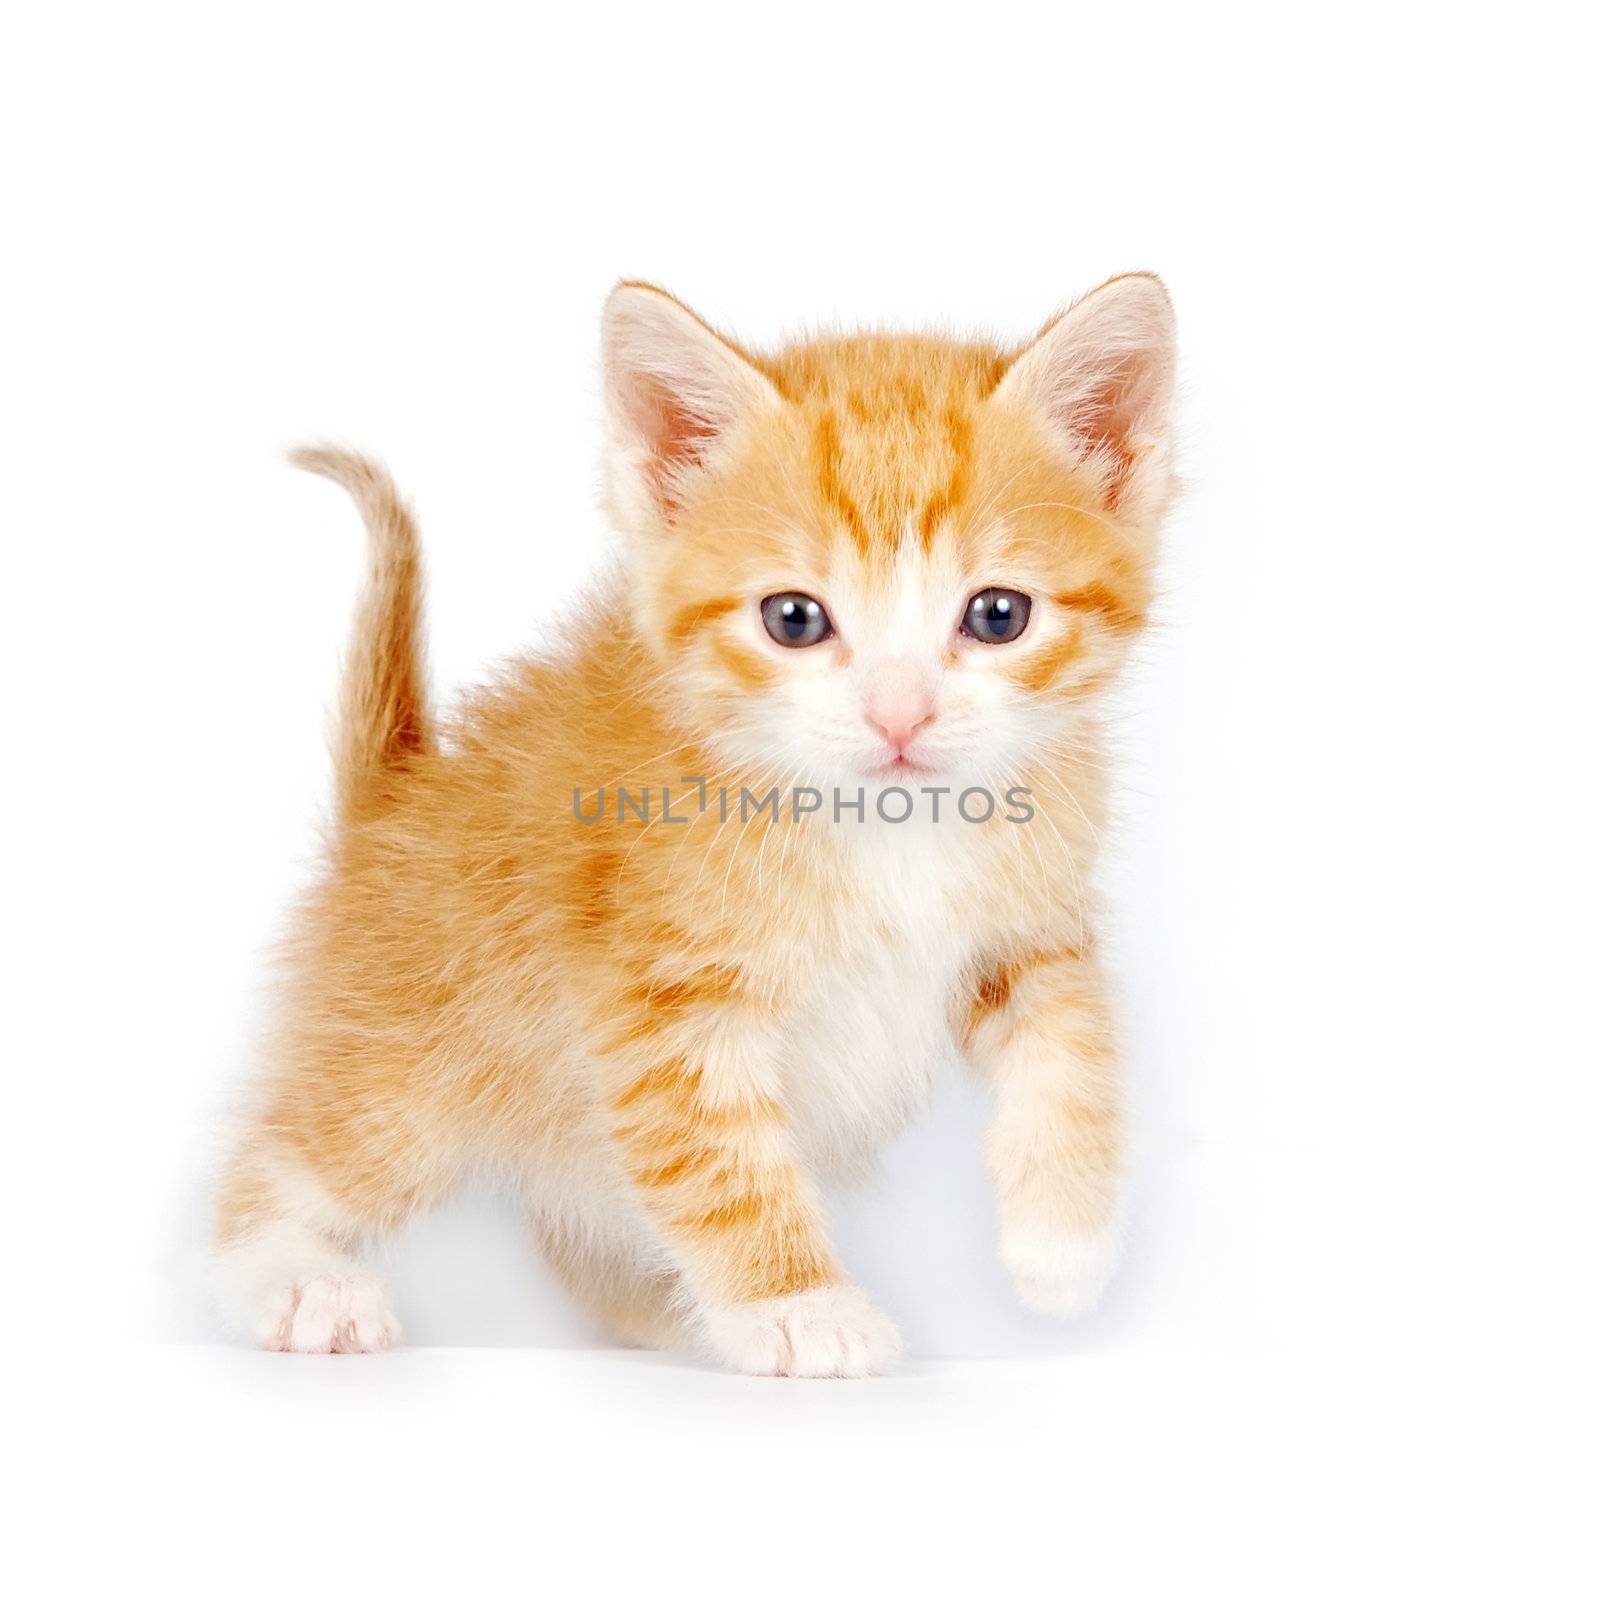 Small red curious kitten on a white background